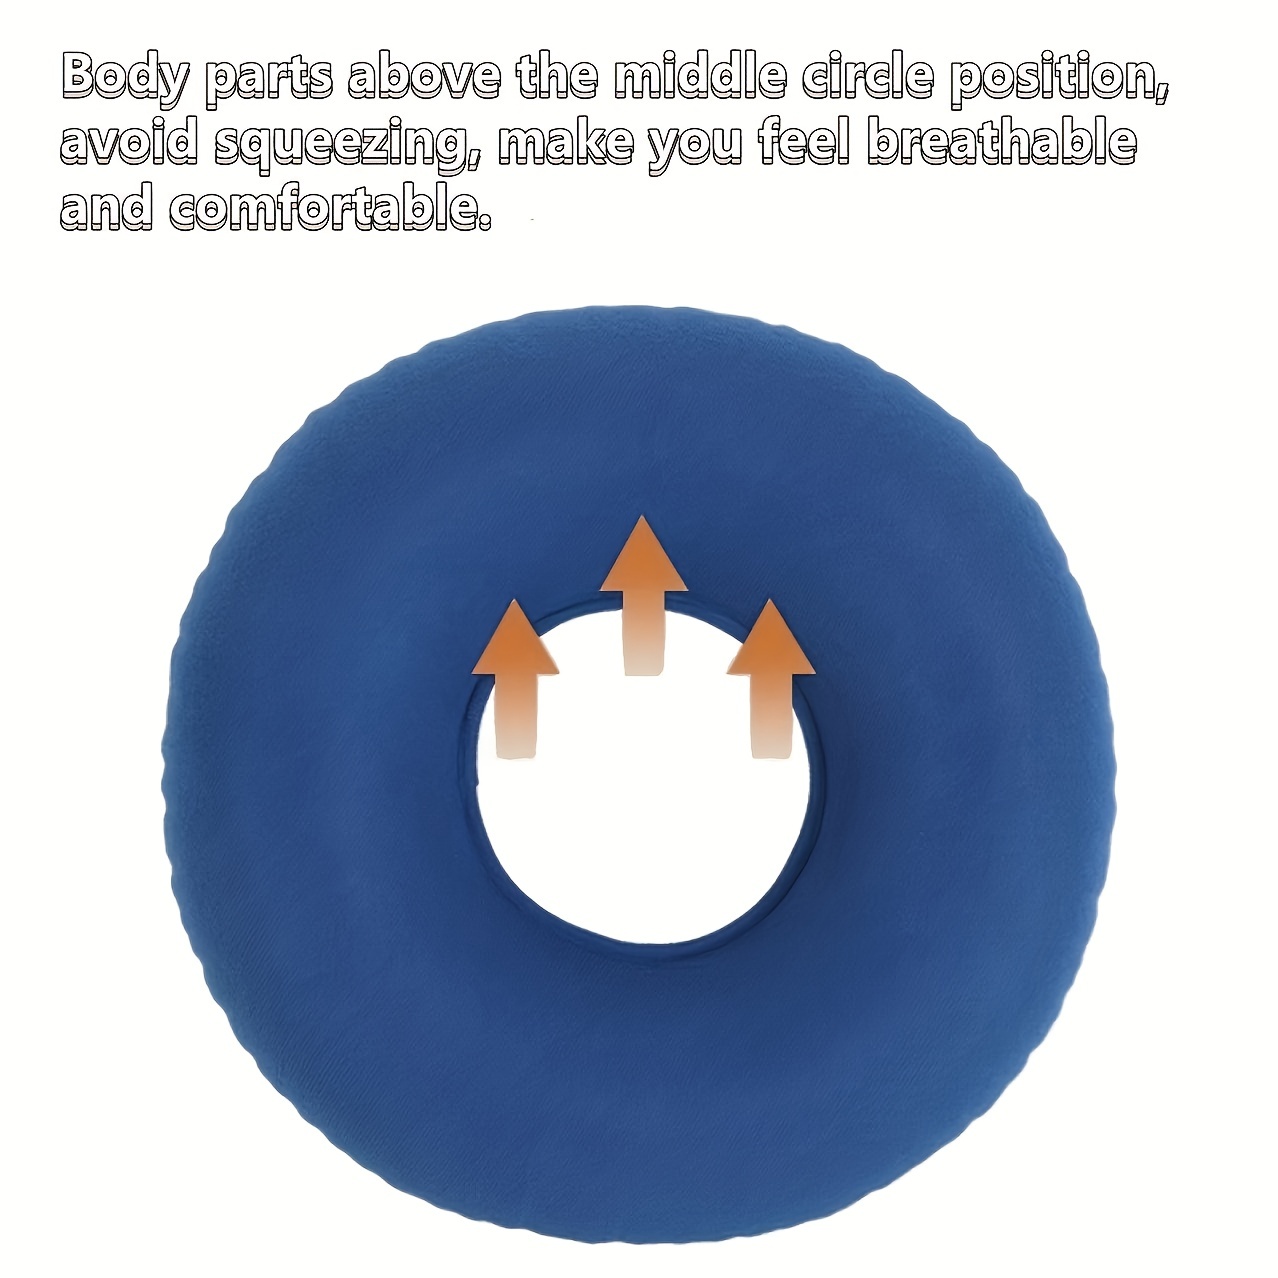 Donut Inflatable Seat Cushion for Tailbone and Bed Sores, Donut